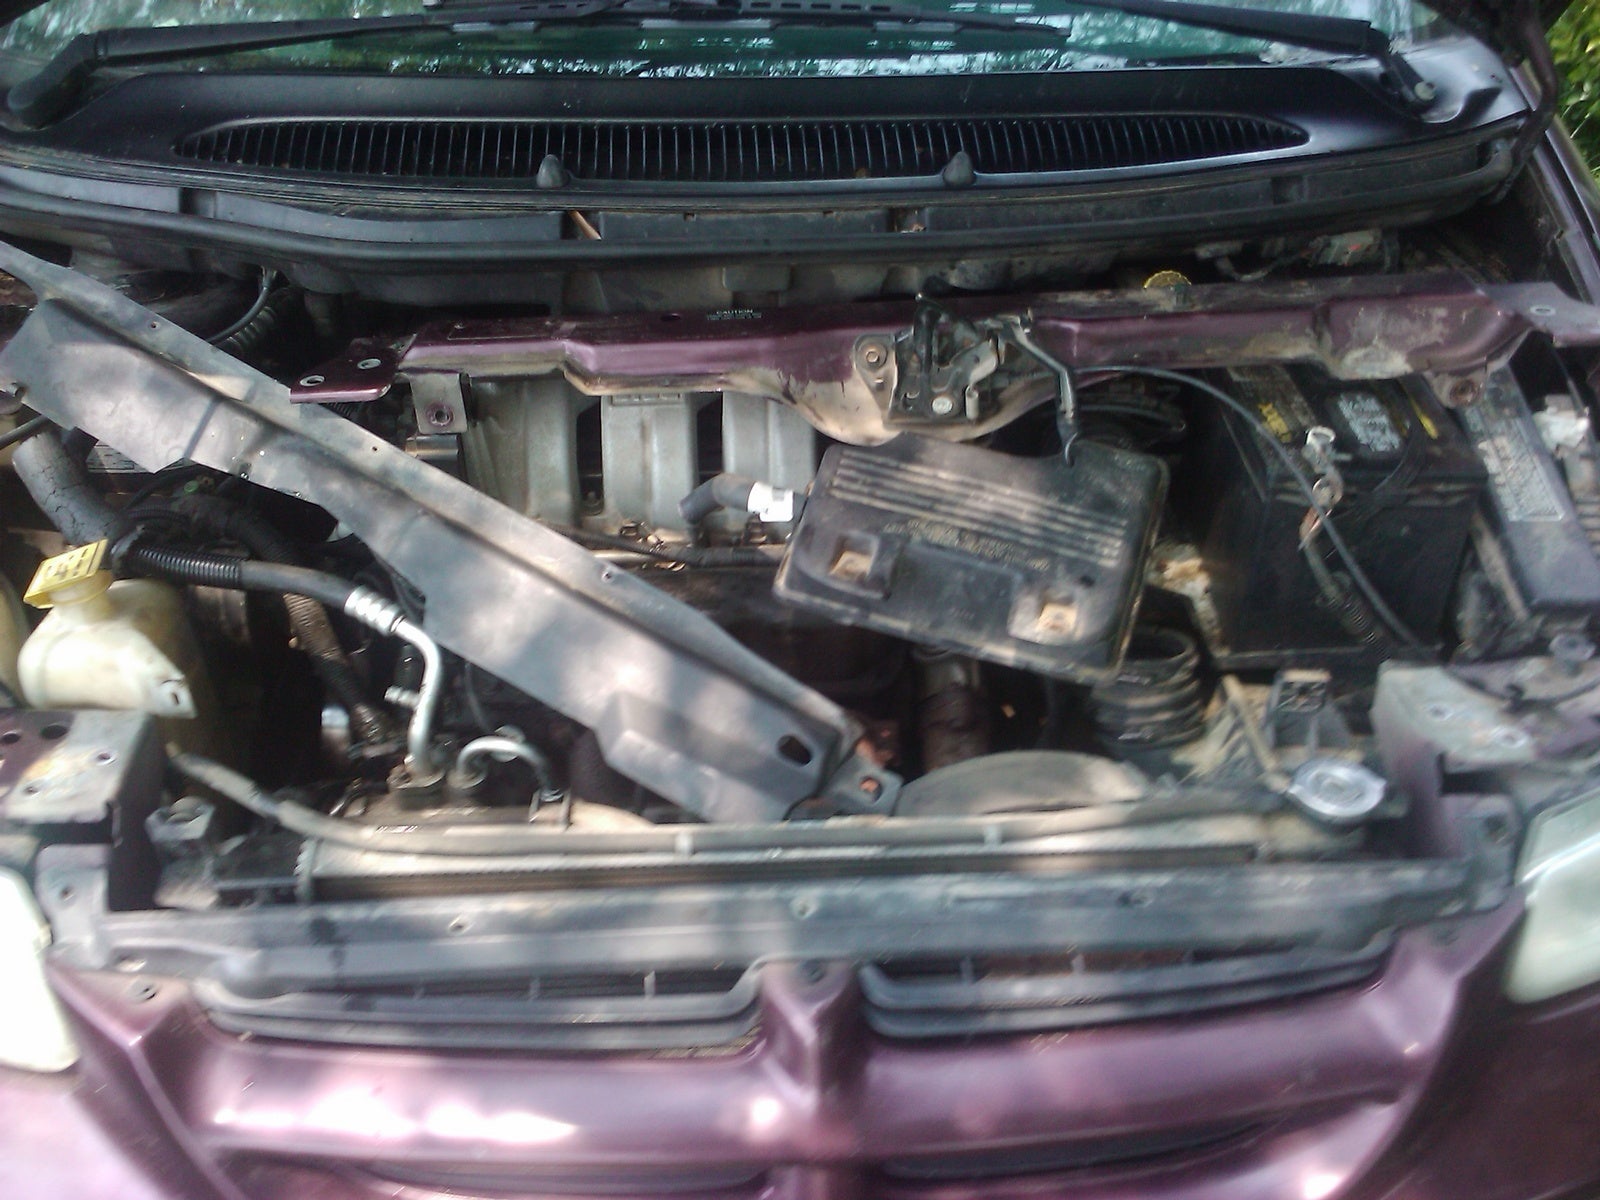 HOW DO YOU REPLACE THE RADIATOR ON A 1996-1999 TAURUS - SABLE